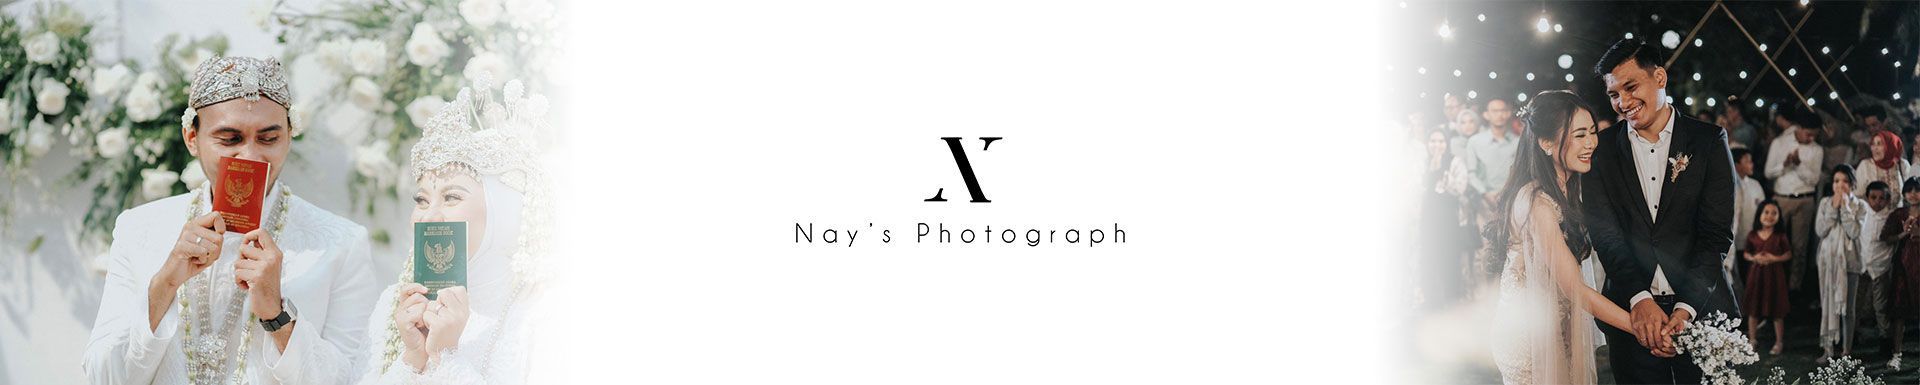 Nay's Photography